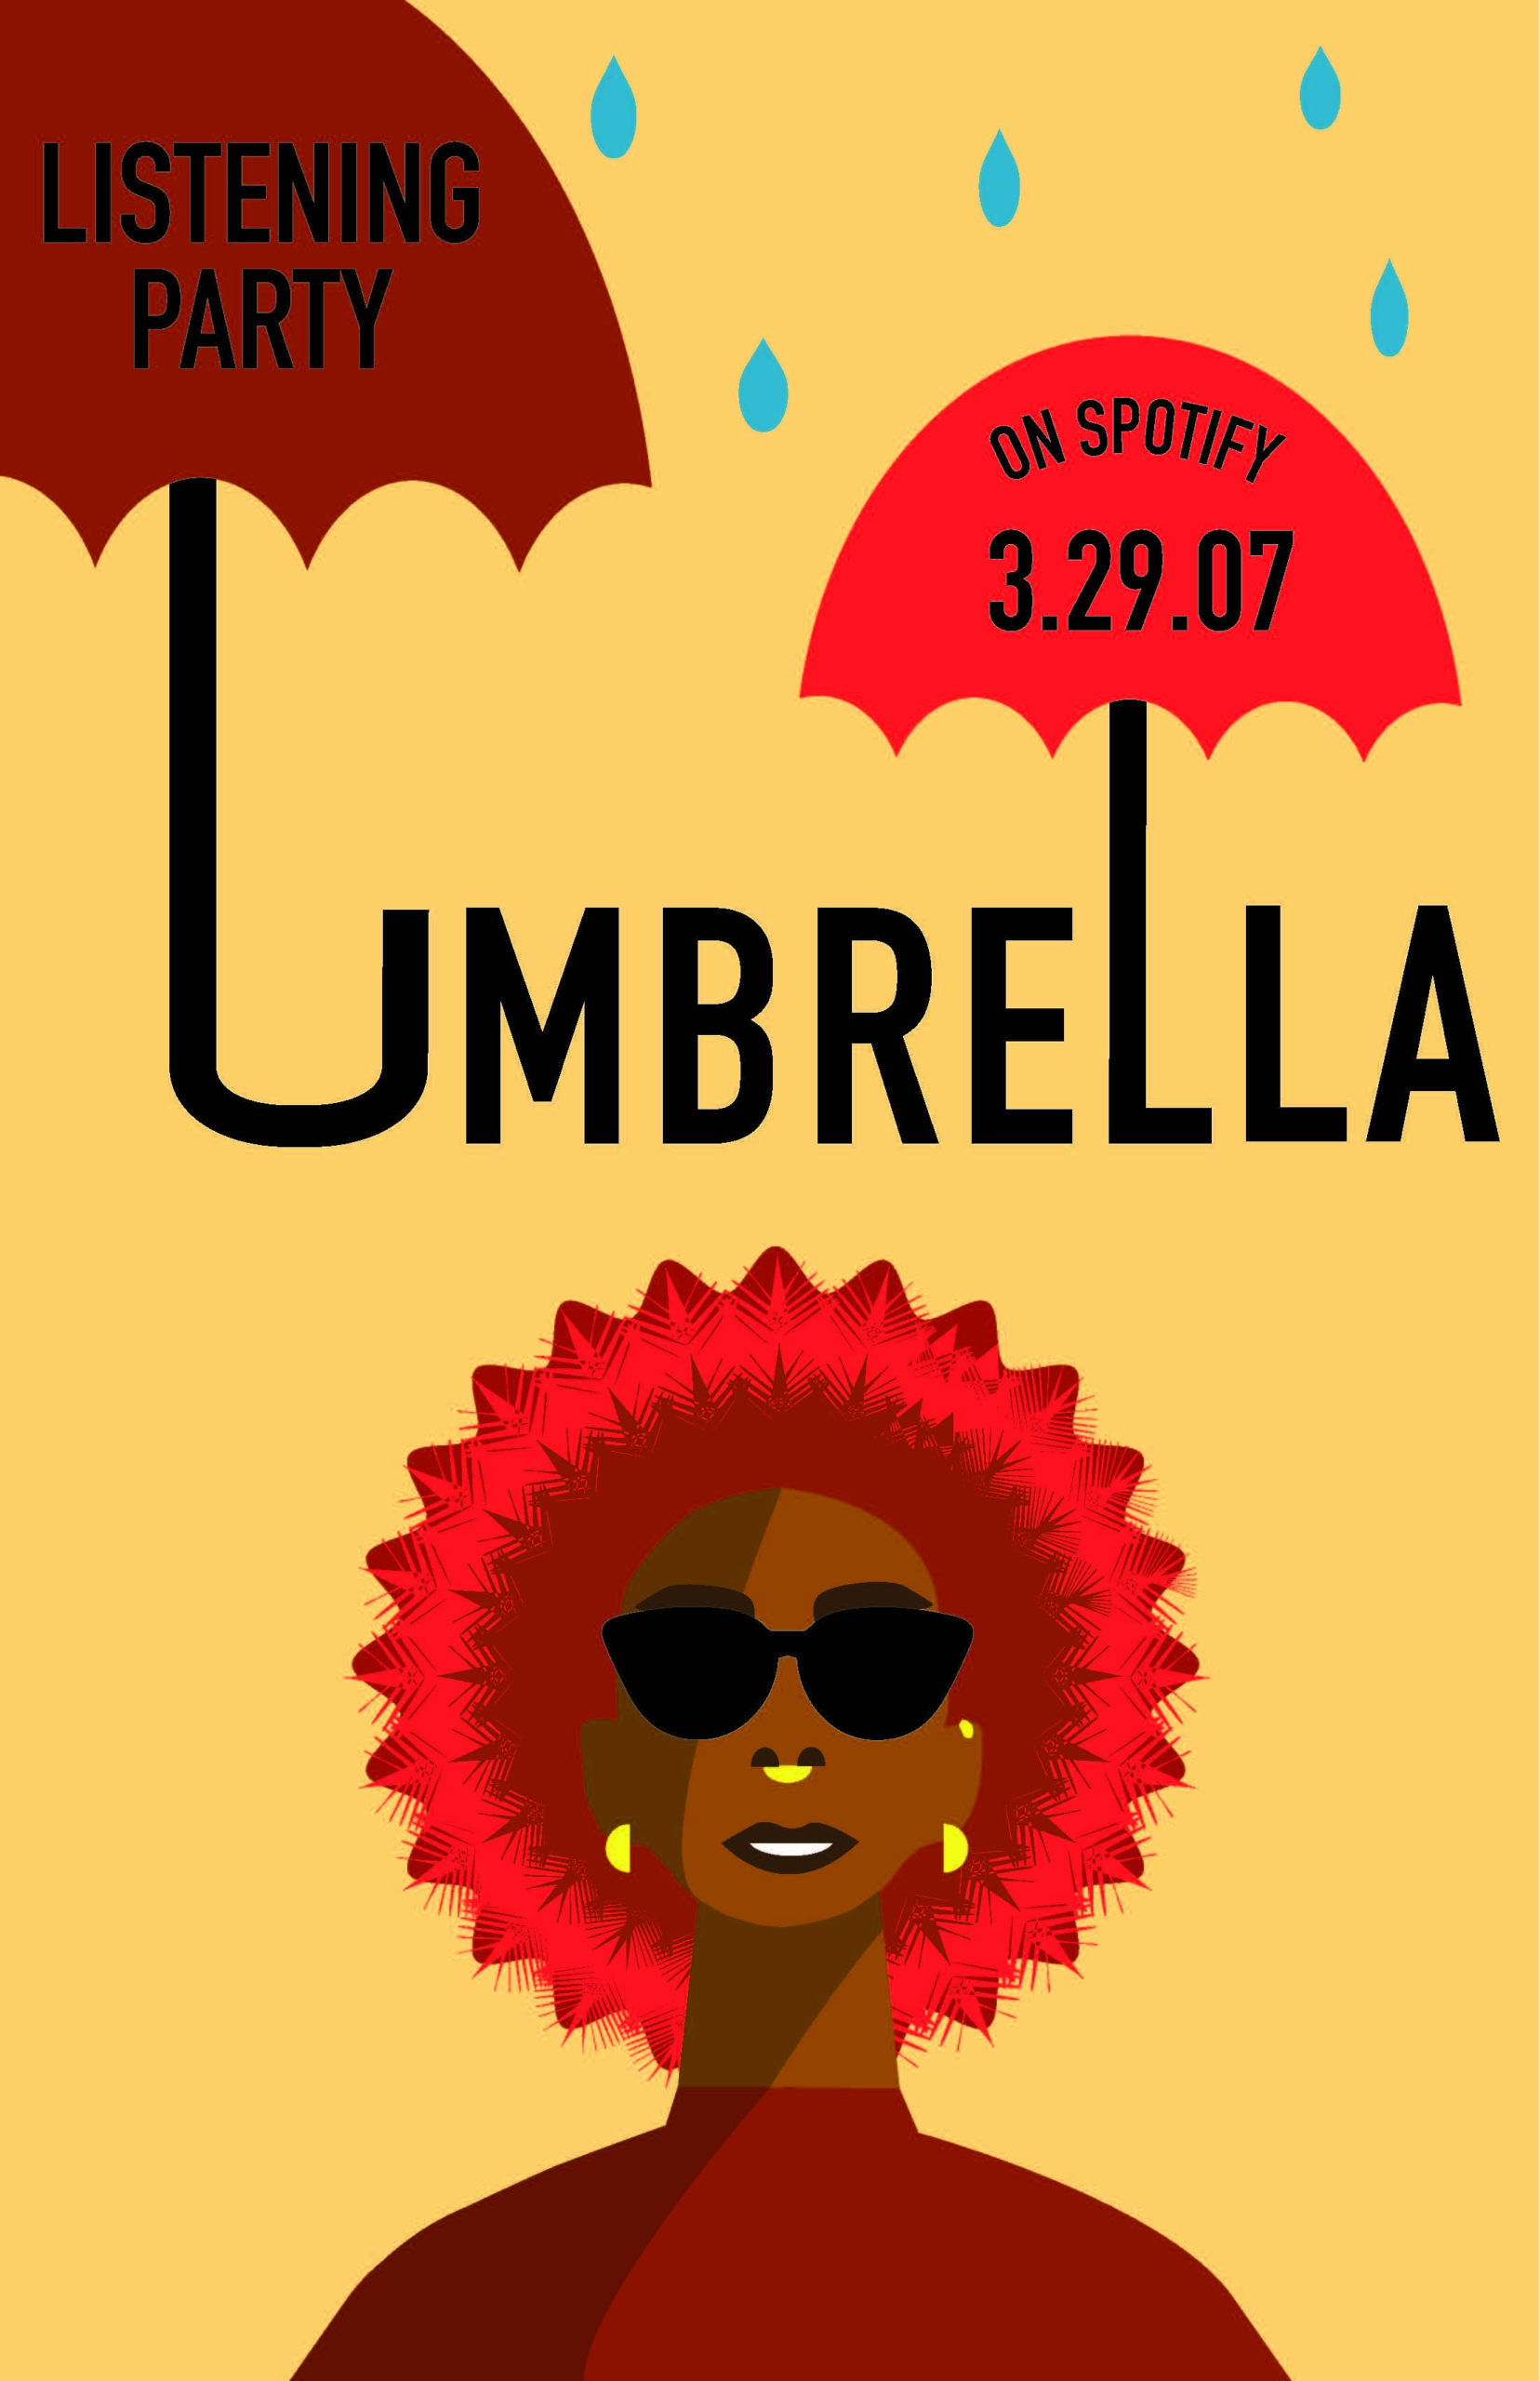 Poster for Sophie DeRuntz's Spotify listening party featuring "Umbrella" by Rihanna. Additional text reads: "on Spotify 3.29.07."